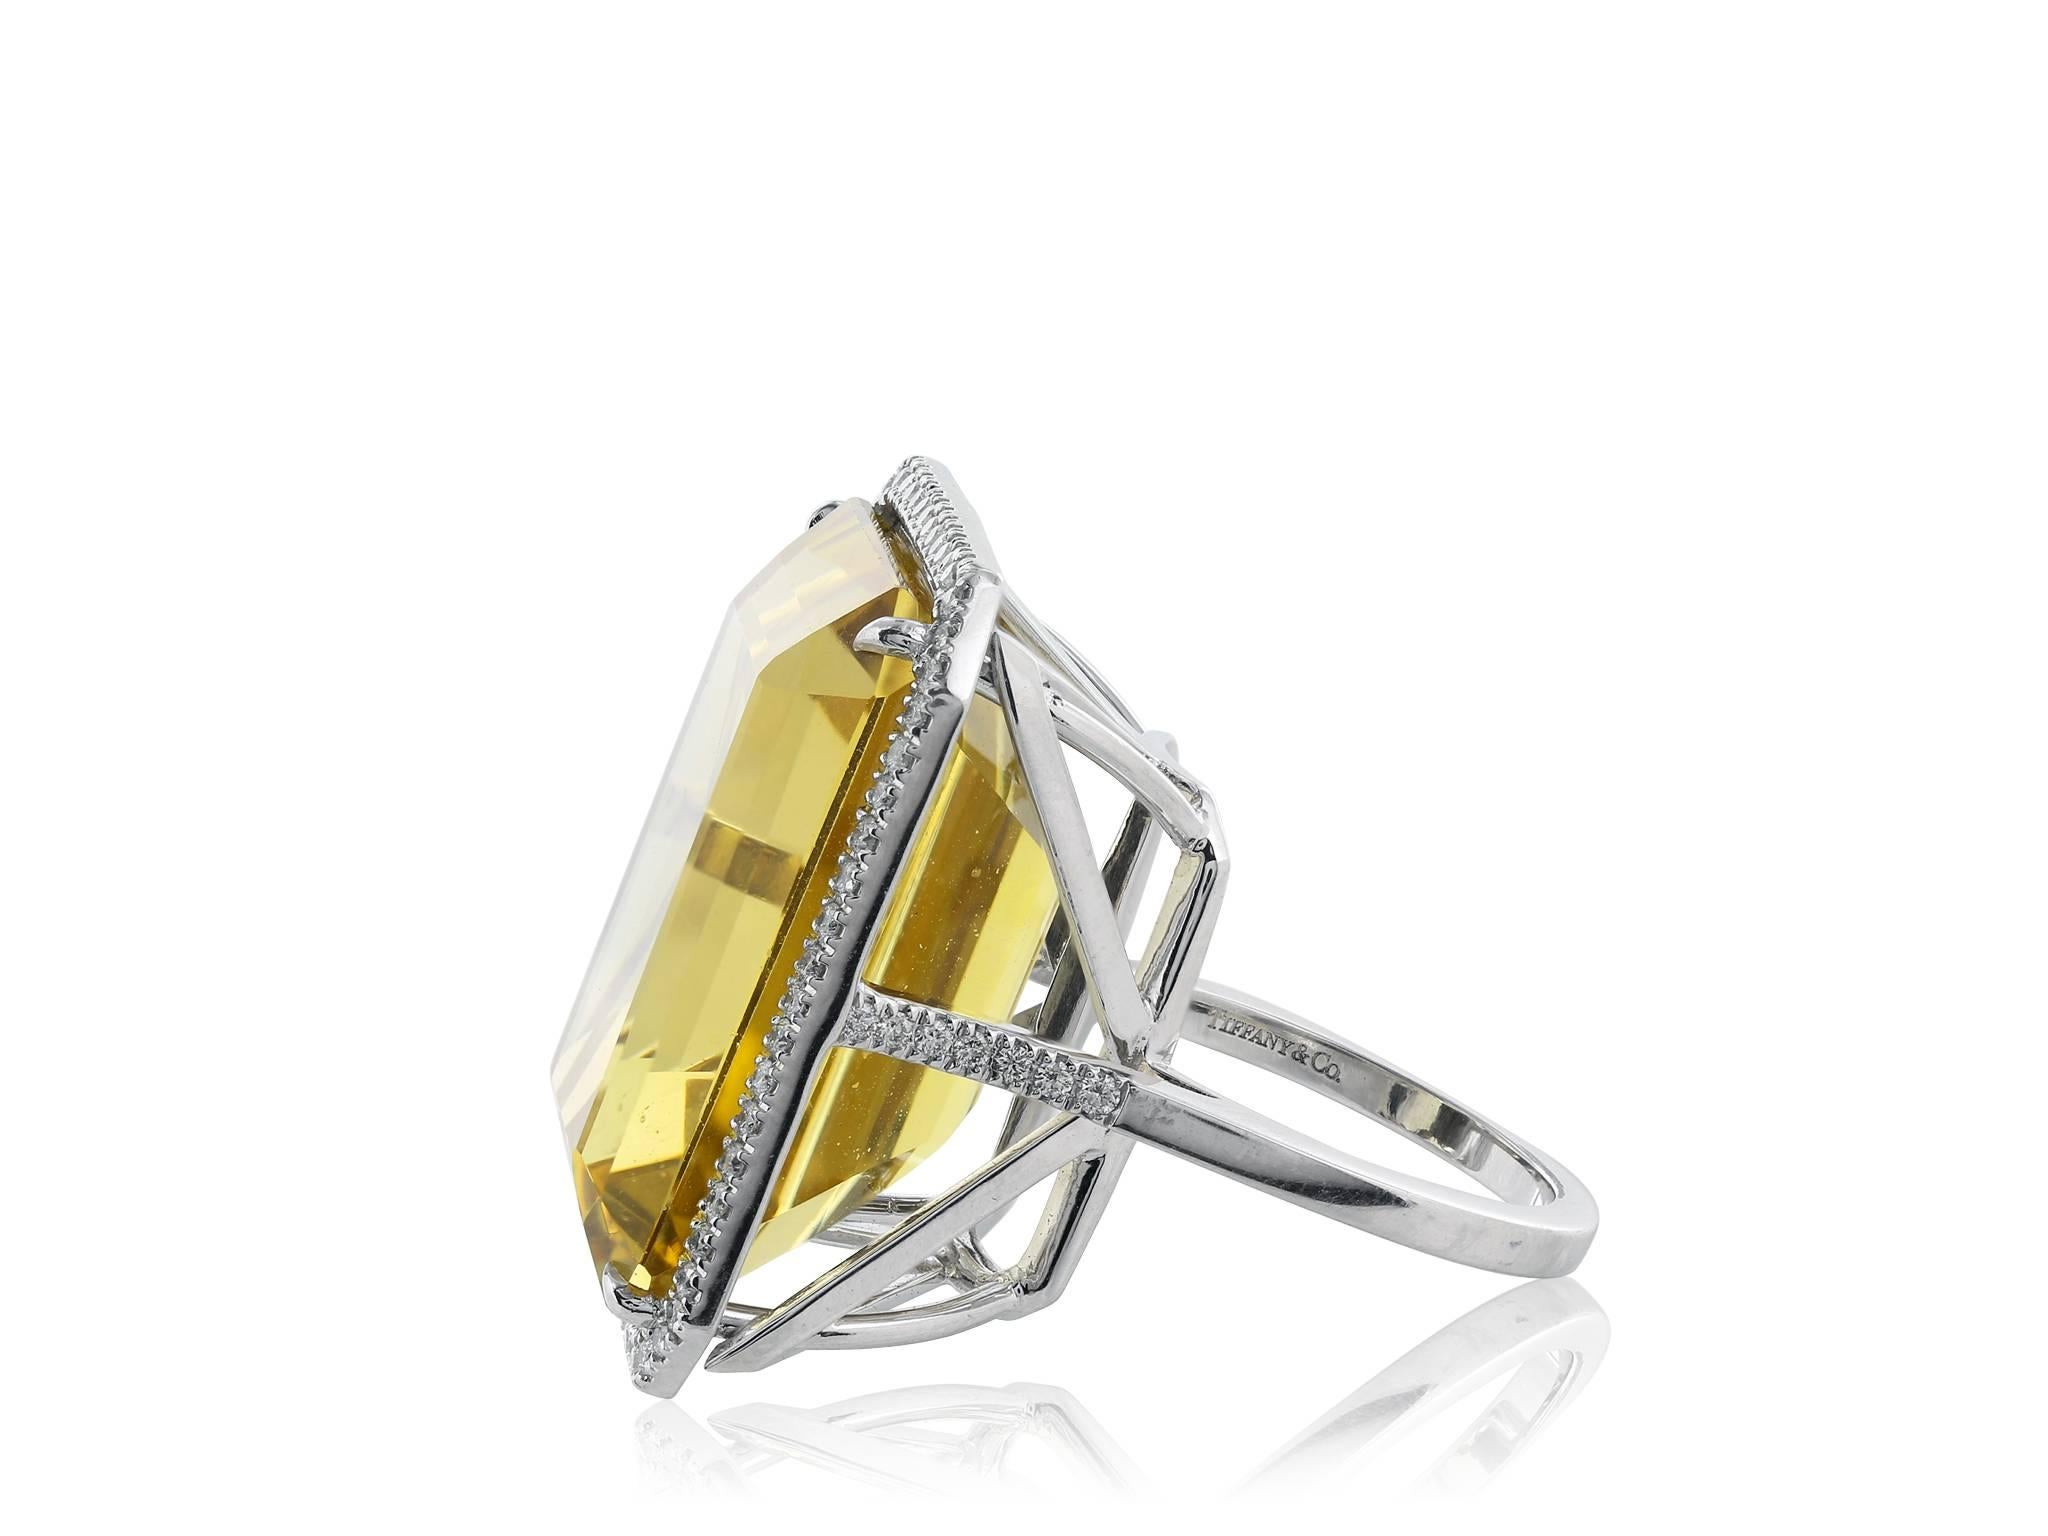 Platinum ring featuring 1 emerald cut citrine weighing approximately 30 carats surrounded by full cut diamonds. Singed Tiffany & Co